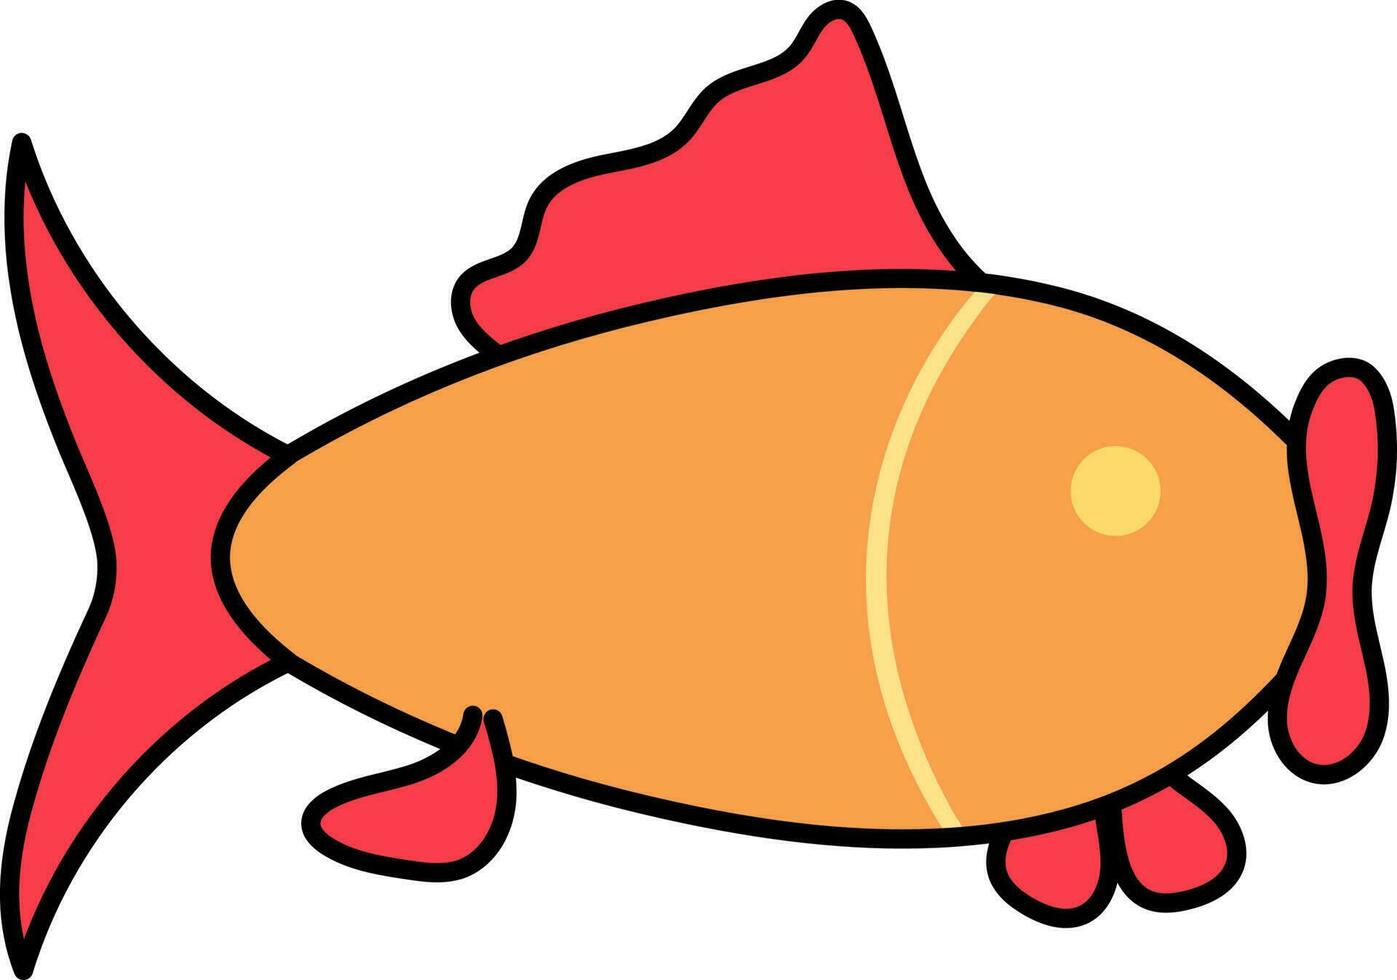 Isolated Carp Fish Icon In Red And Orange Color. vector